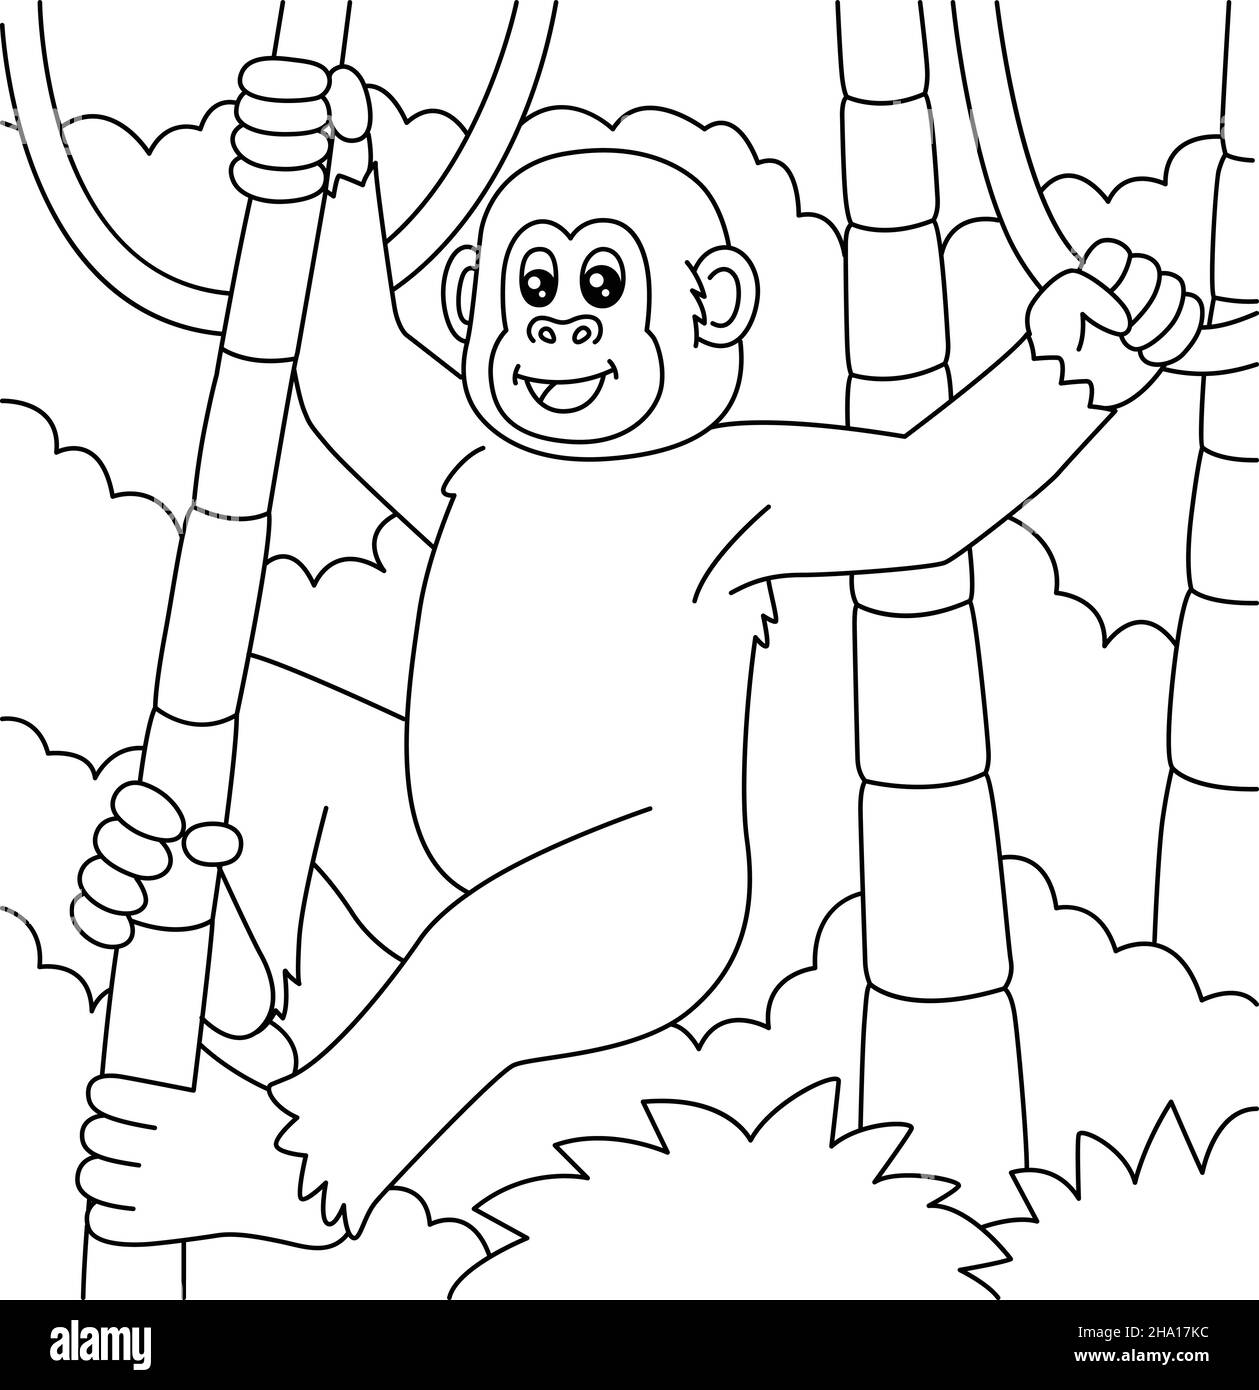 Funny Monkey coloring page | Free Printable Coloring Pages